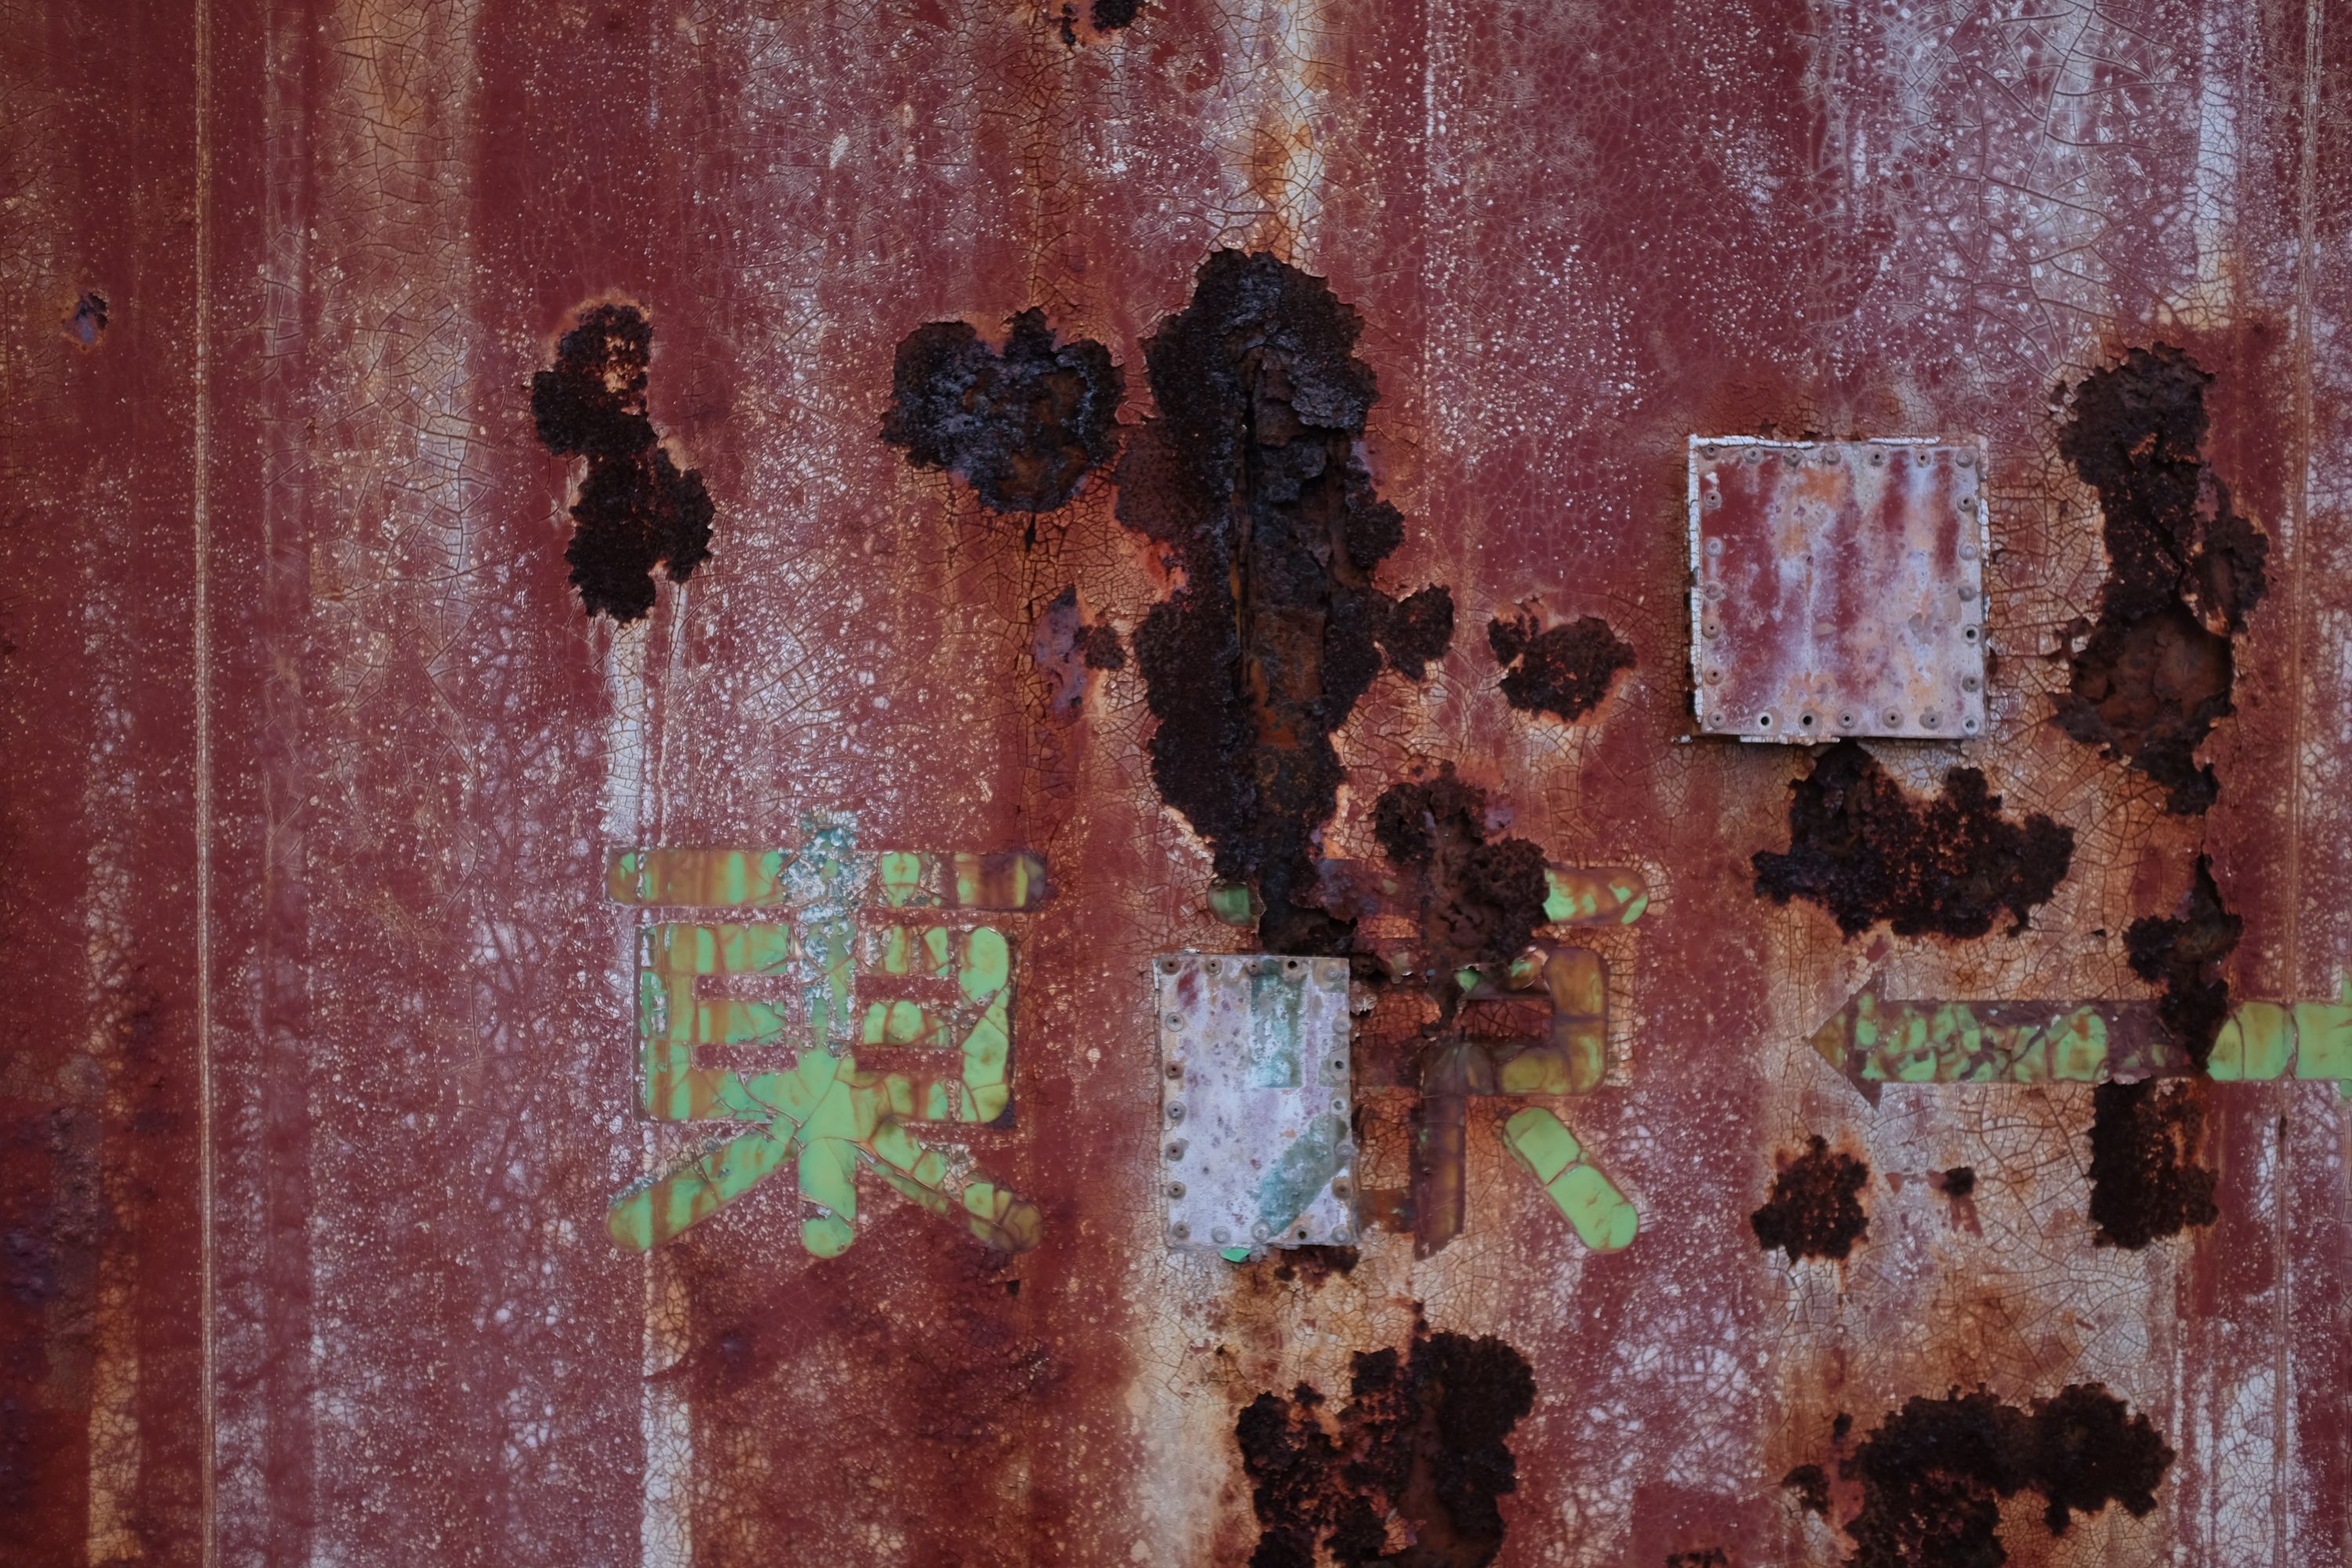 Closeup of the container shows the Japanese characters for Tokyo amid the rust.